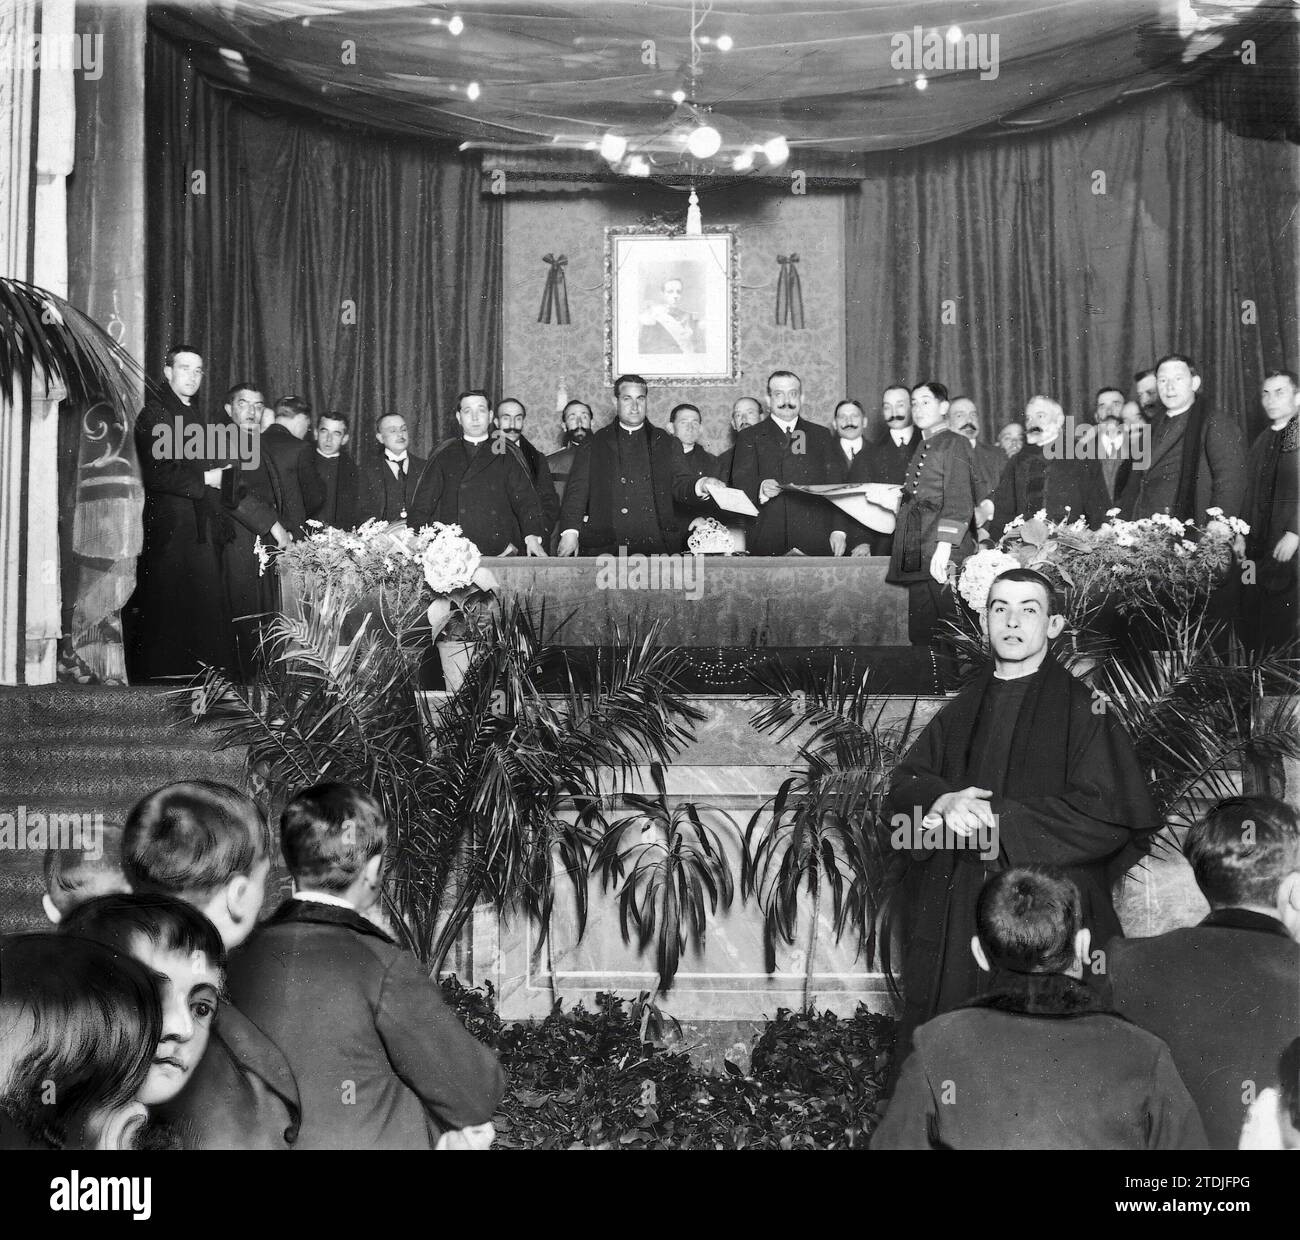 12/15/1912. In the royal school of Alfonso Xii, in El Escorial. Solemn distribution of Awards, Chaired by the undersecretary of the Ministry of Public Instruction, Mr. Natalio Rivas. Credit: Album / Archivo ABC / Julio Duque Stock Photo